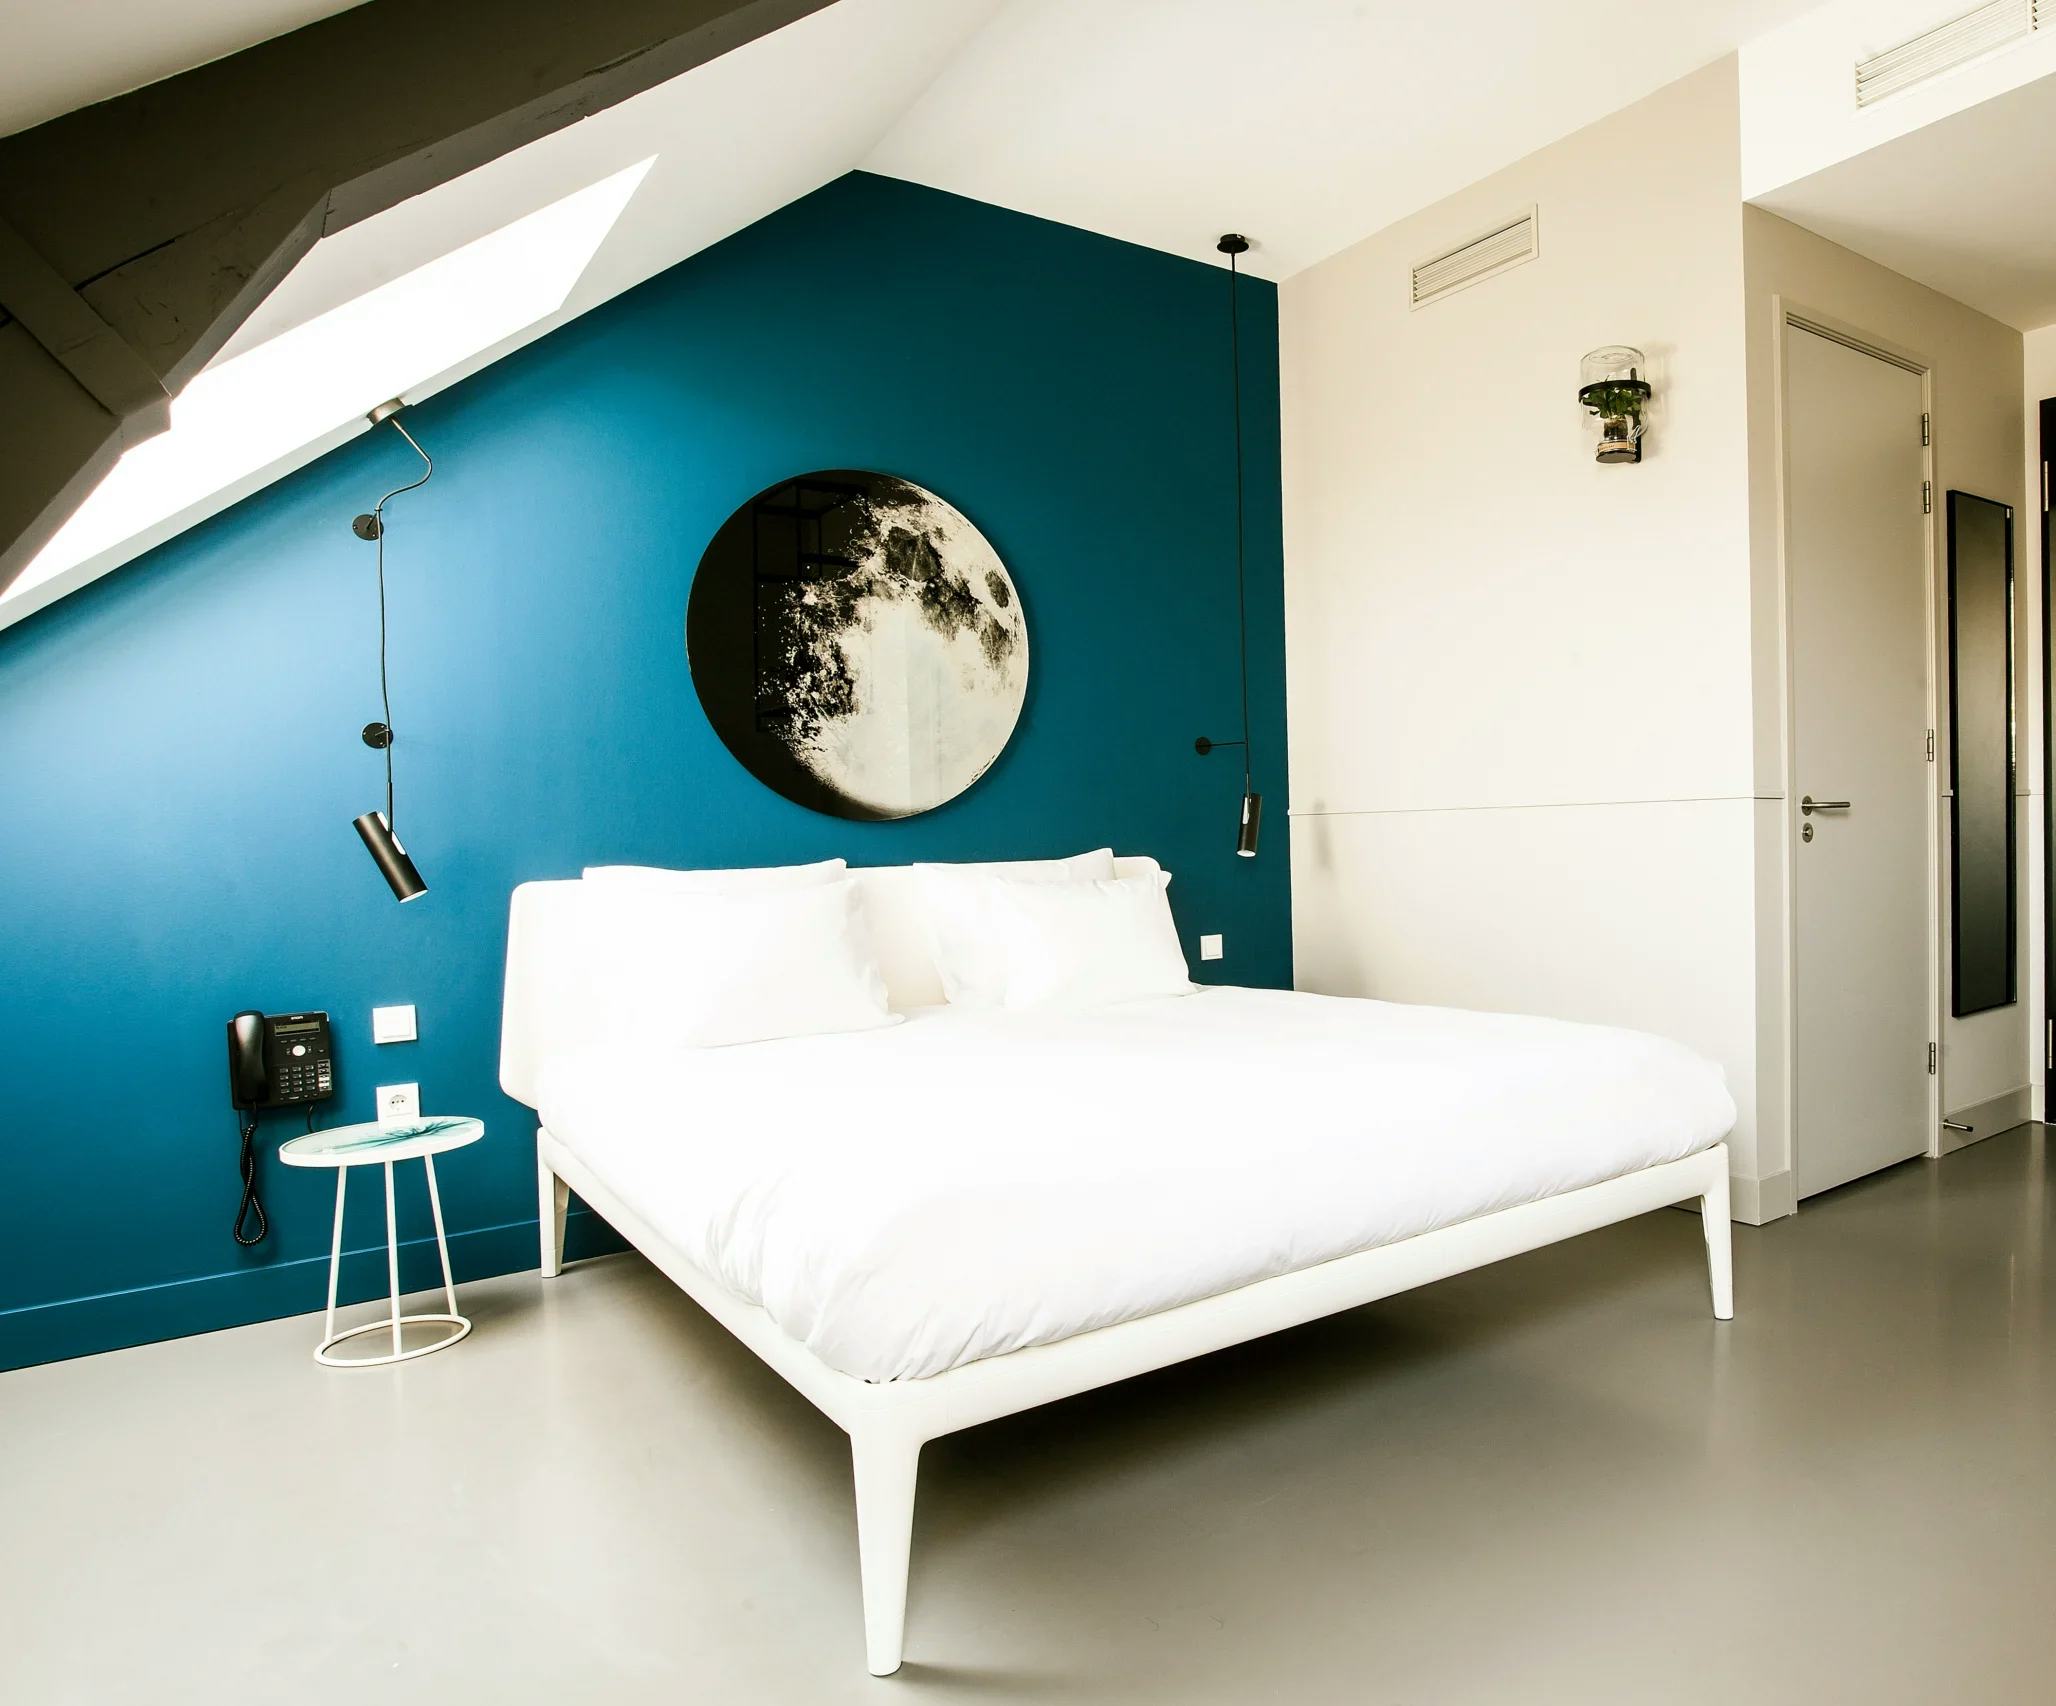 conscious hotel - double room bed